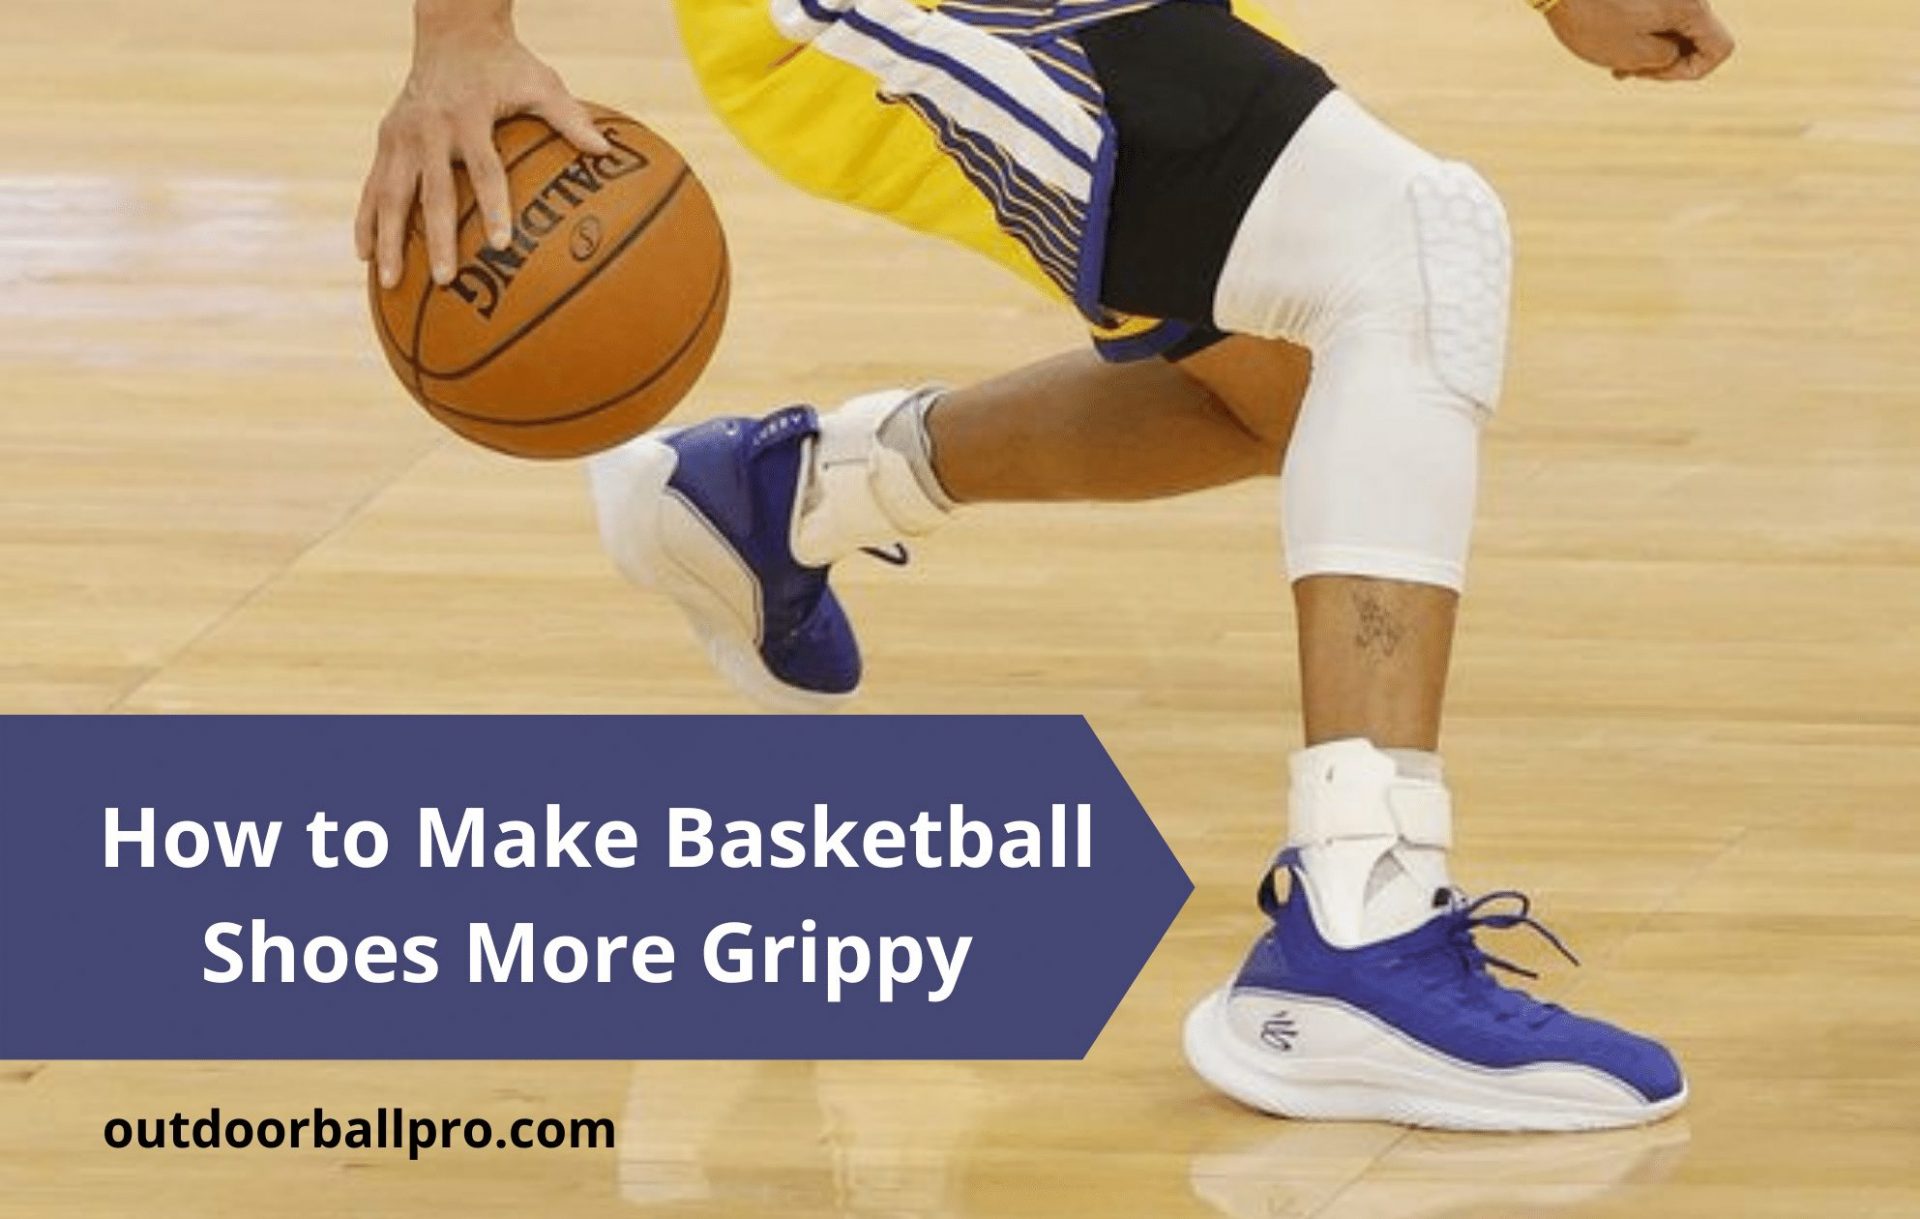 How to Make Basketball Shoes More Grippy – Improve Traction 2022